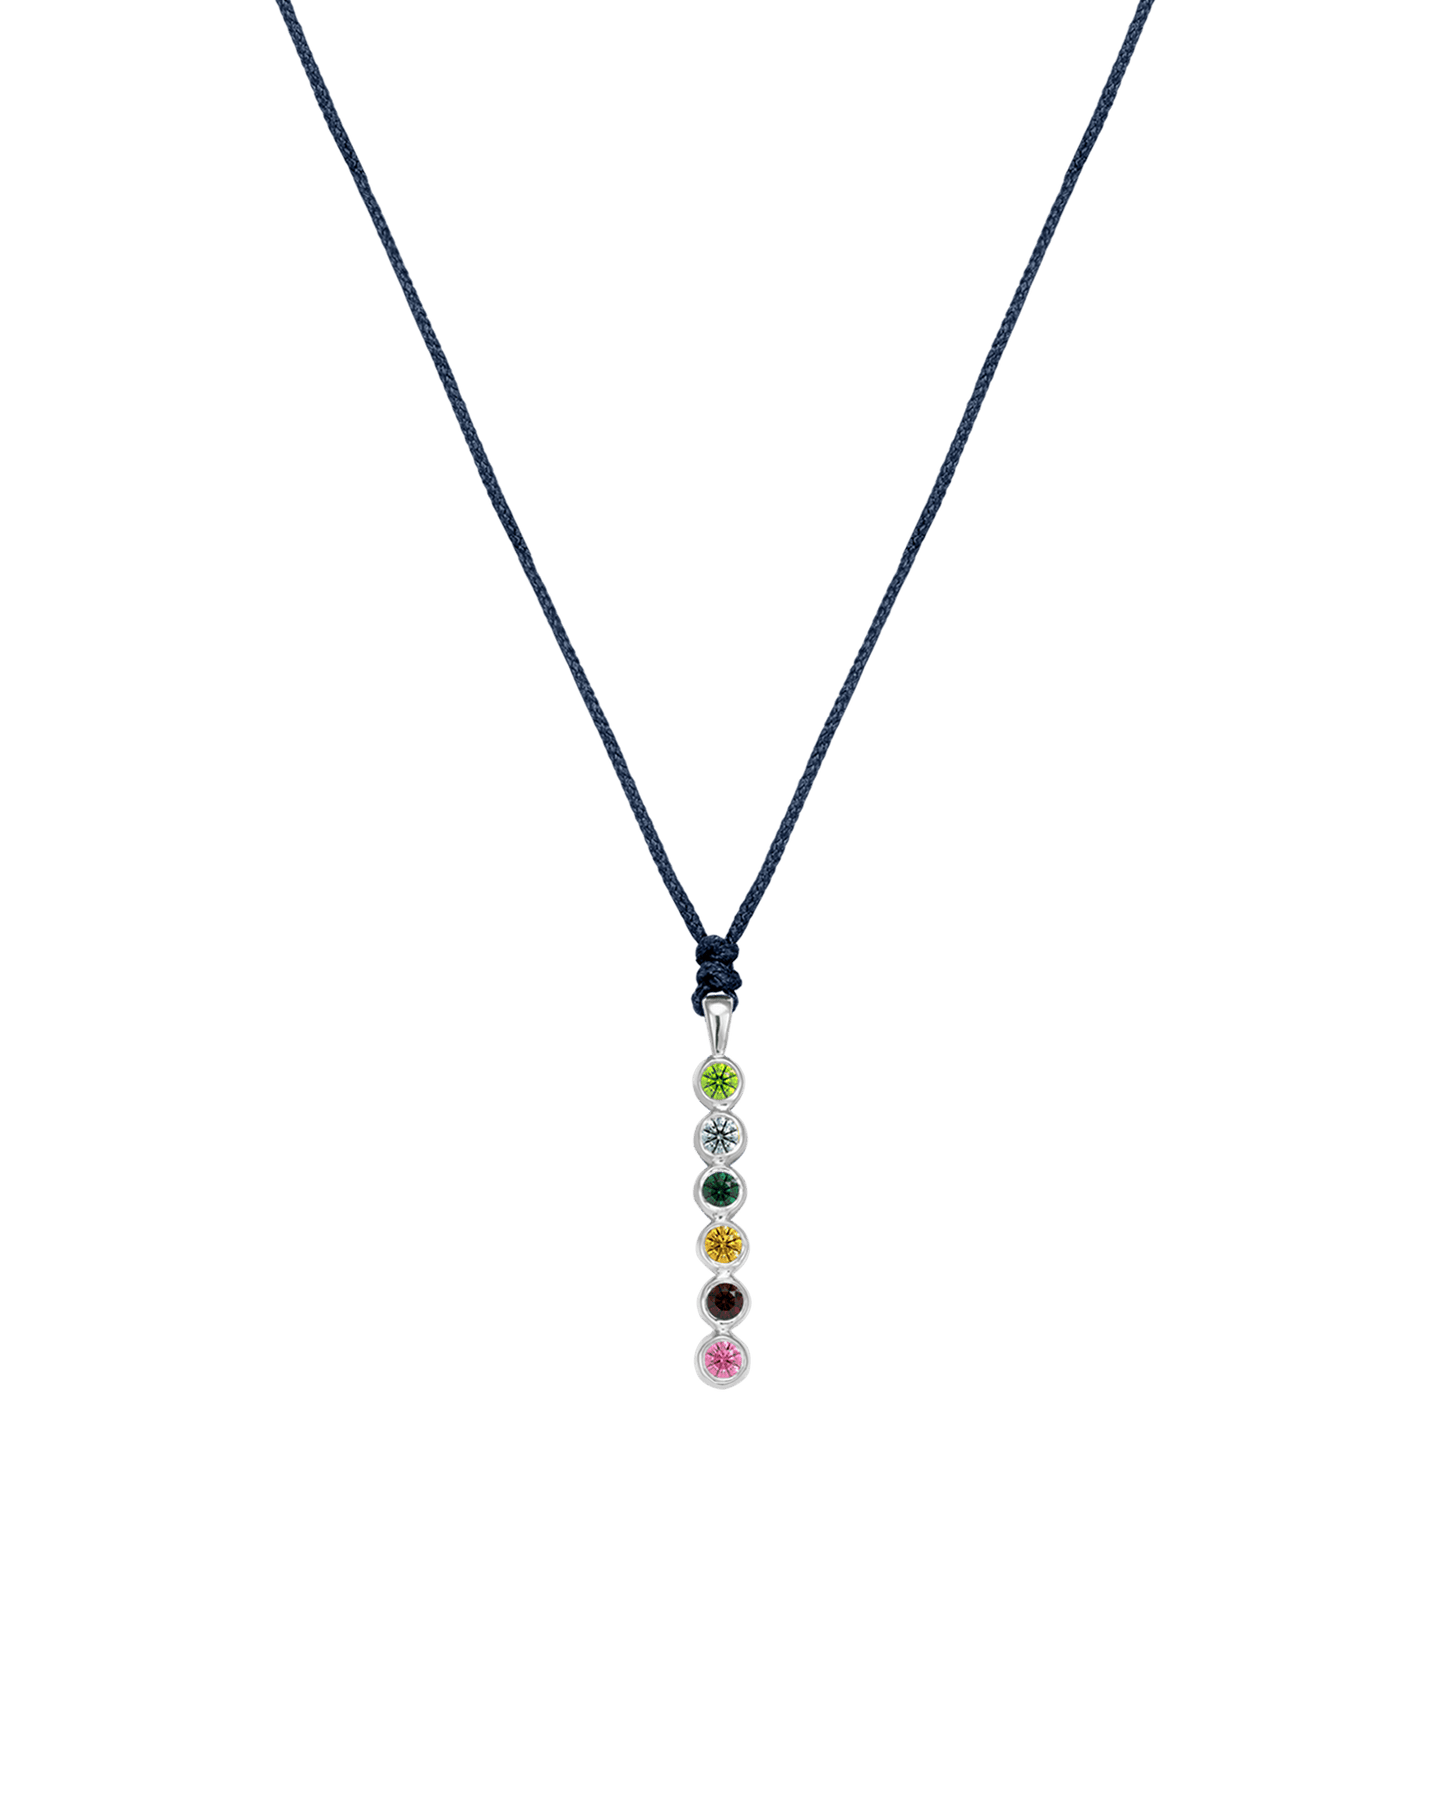 The Birthstones Bar Necklace - 14K White Gold Necklaces 14K Solid Gold Navy Blue 2 